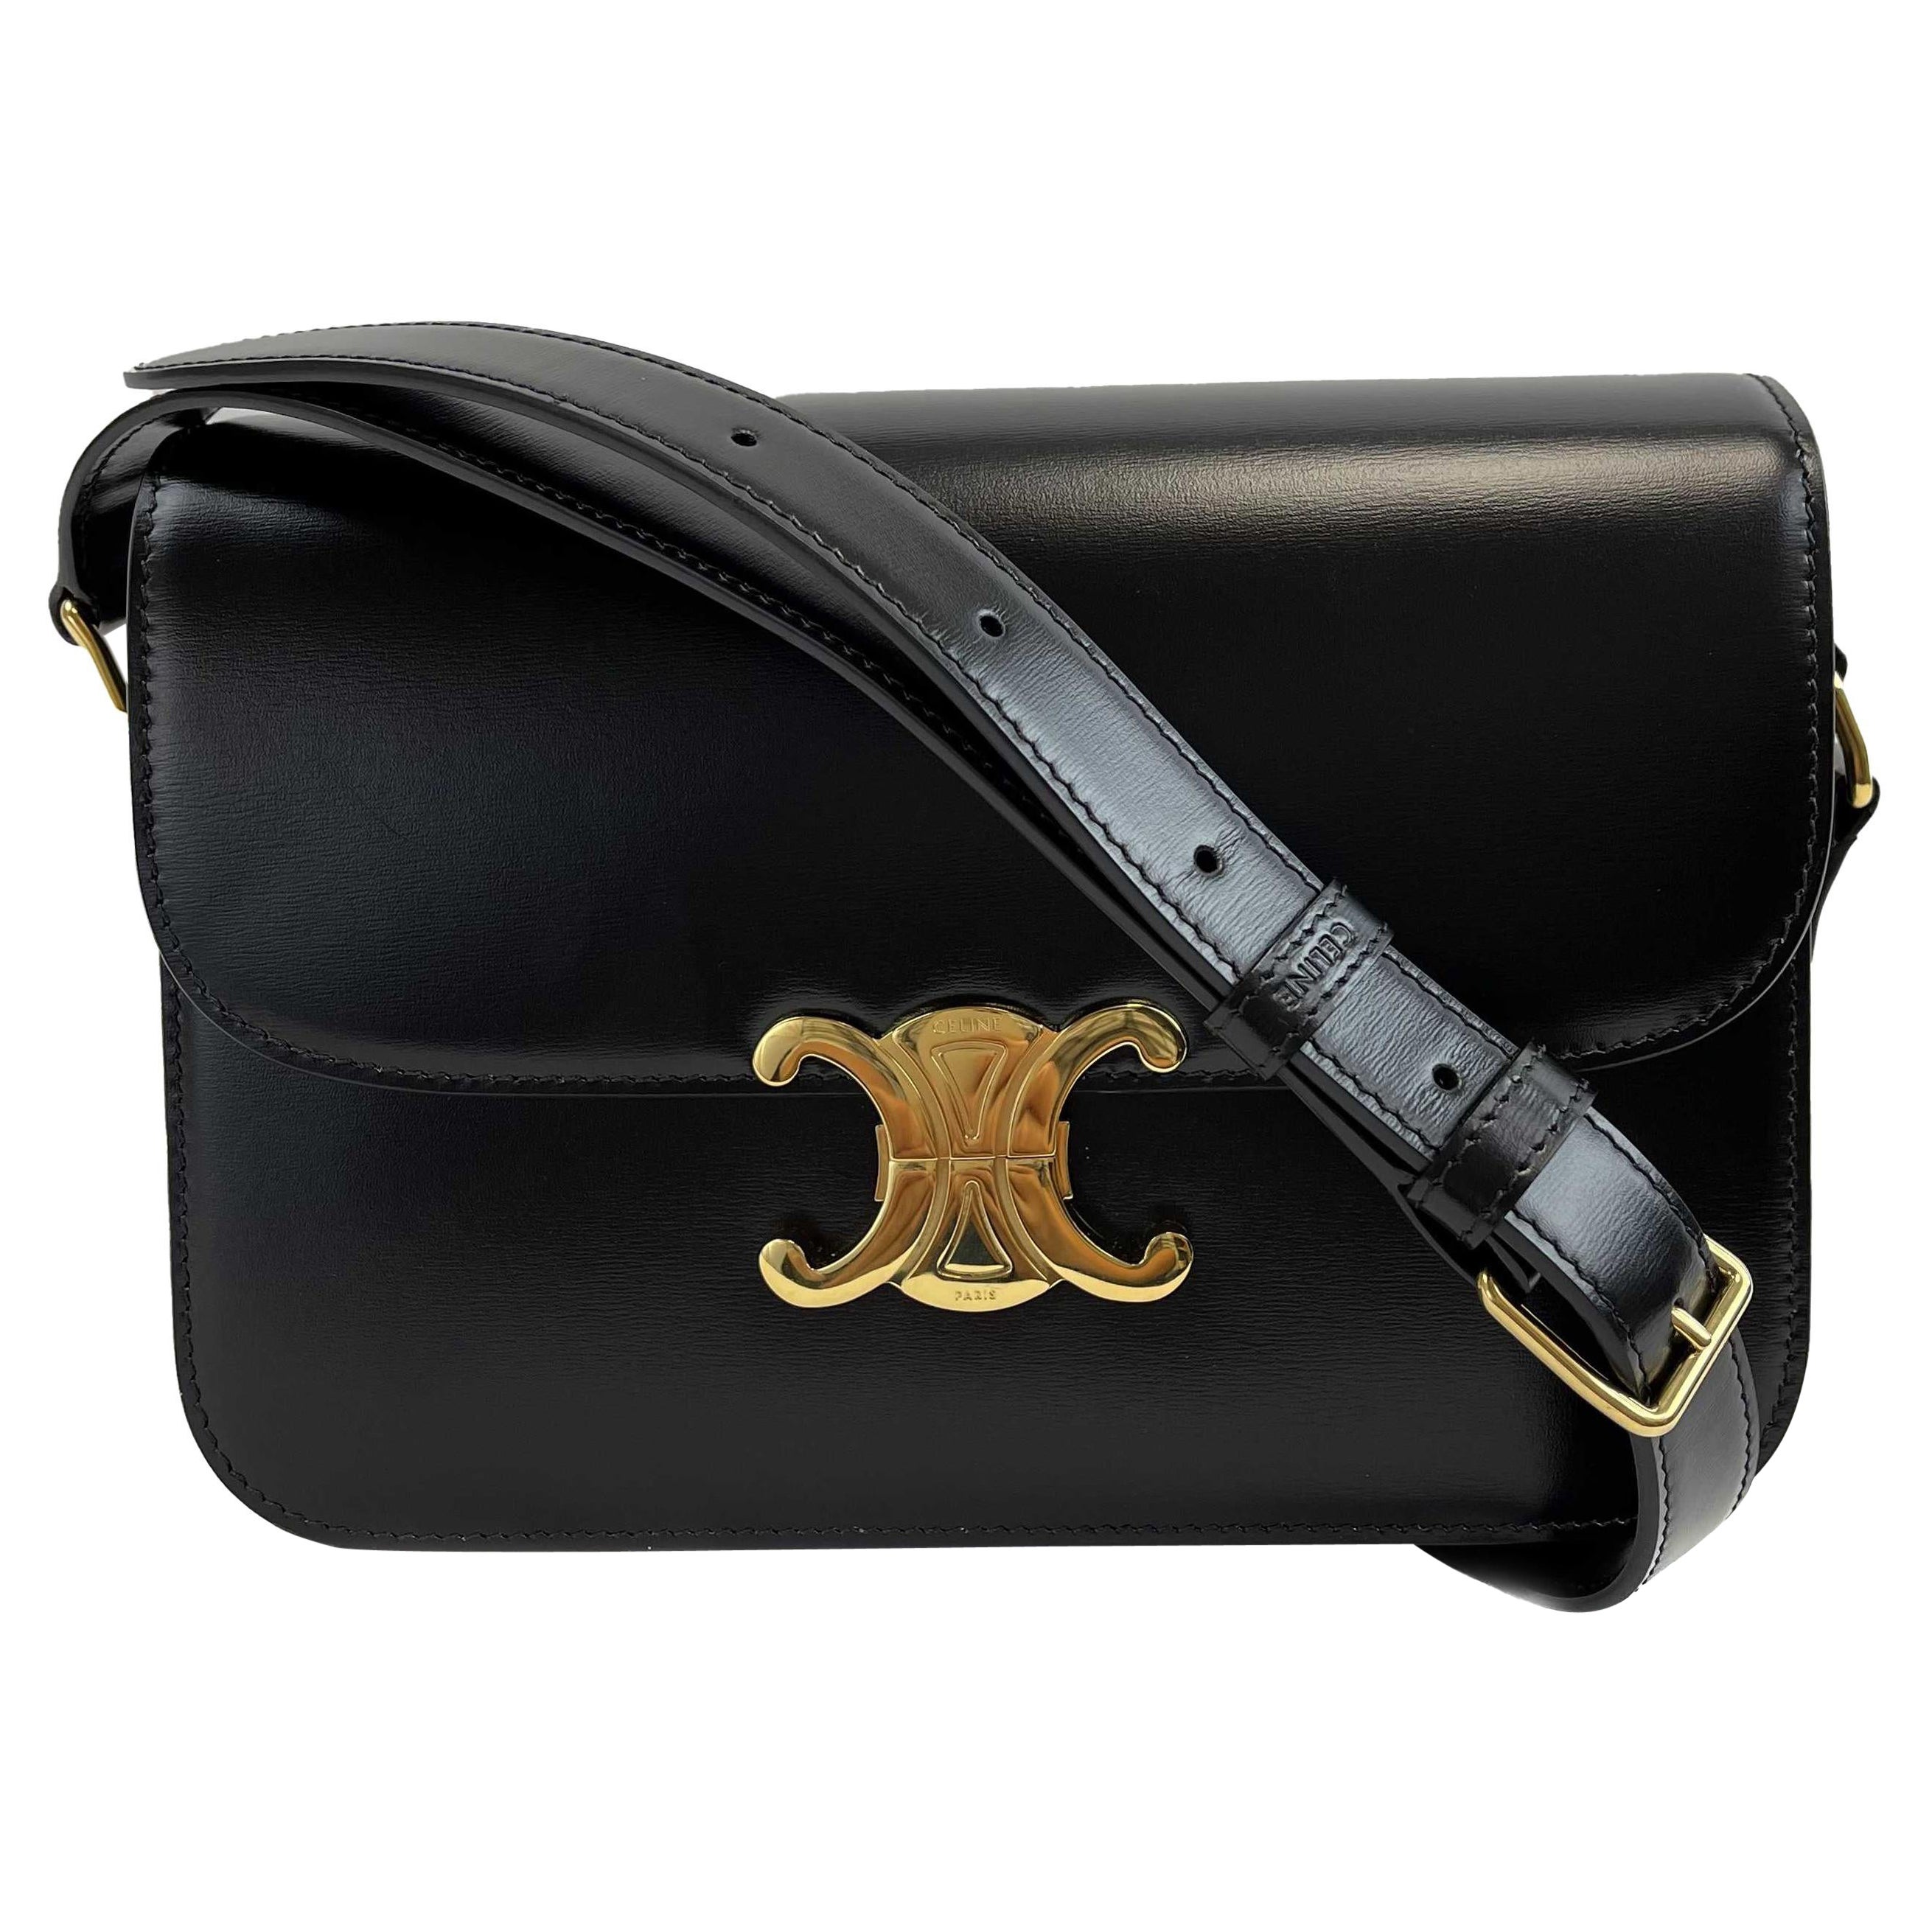 A Chanel Blast from the Past at Heritage Auctions - PurseBop